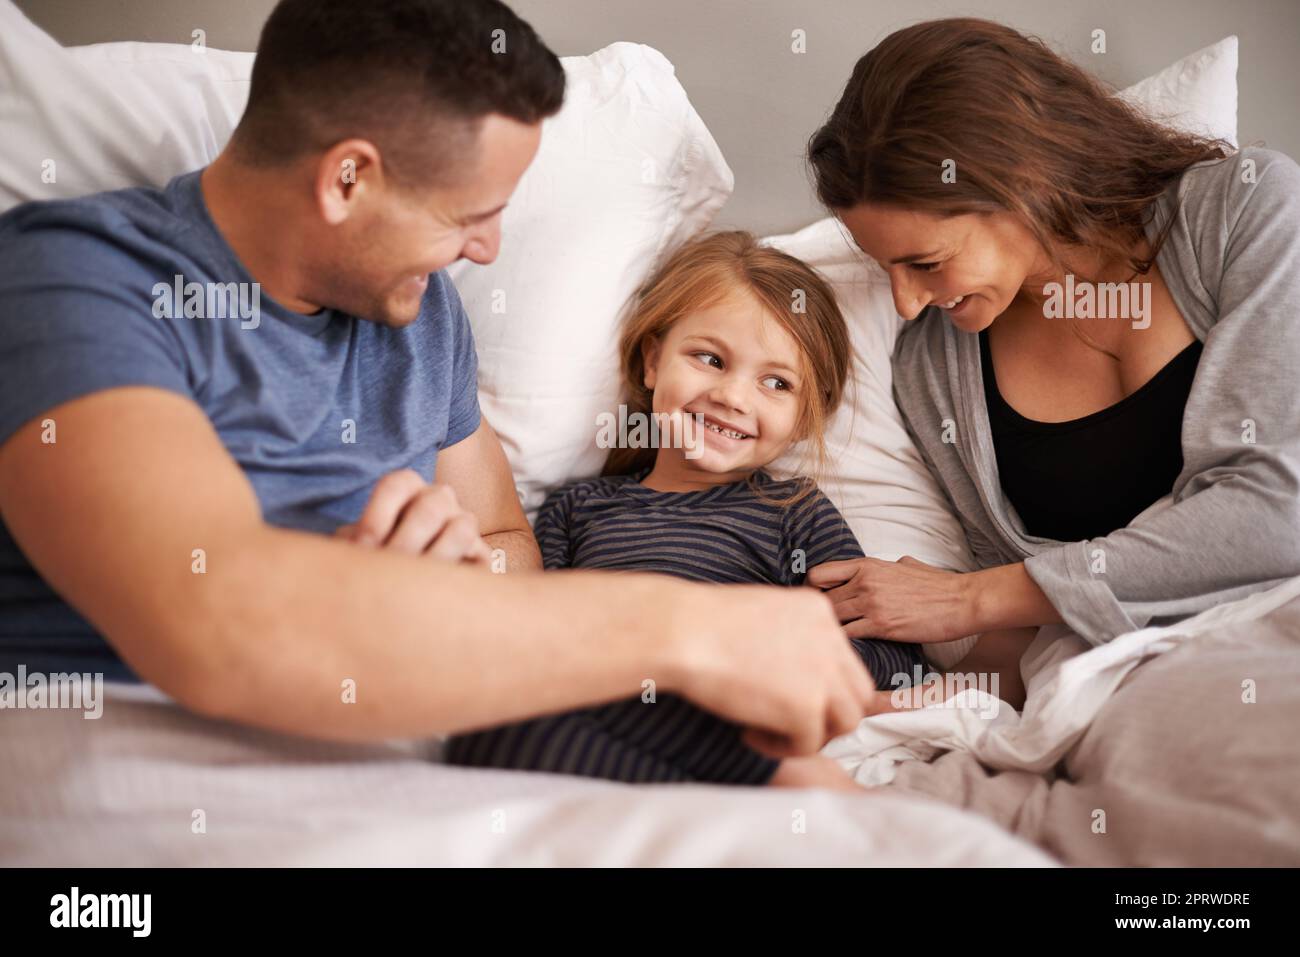 Playful parents. an affectionate young family lying in bed together. Stock Photo